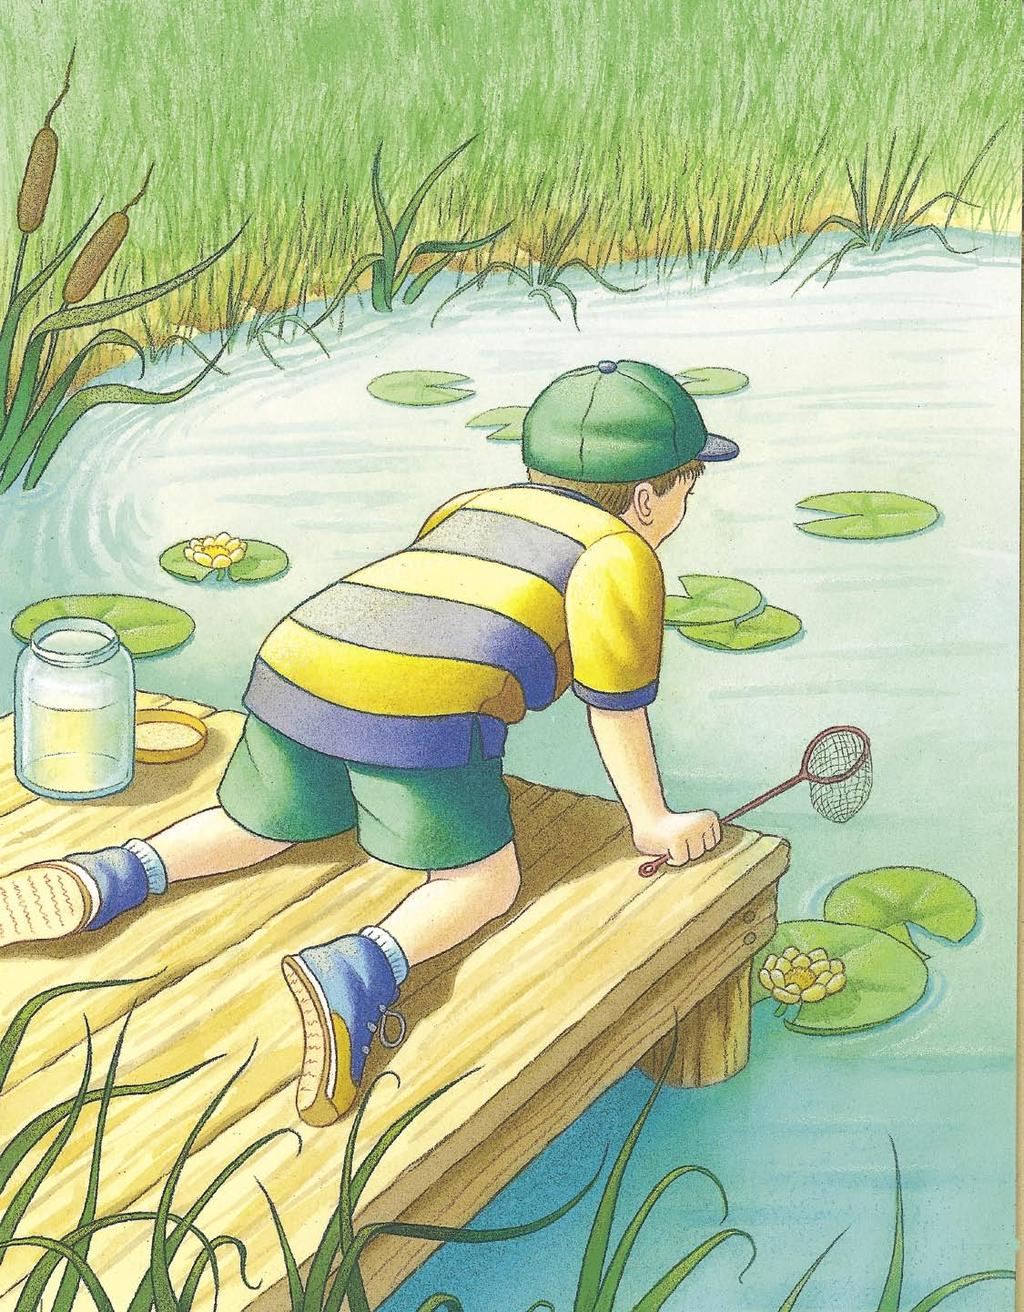 Meanwhile, at the other end of the pond, a boy named Alex was trying to catch some fish with his net.